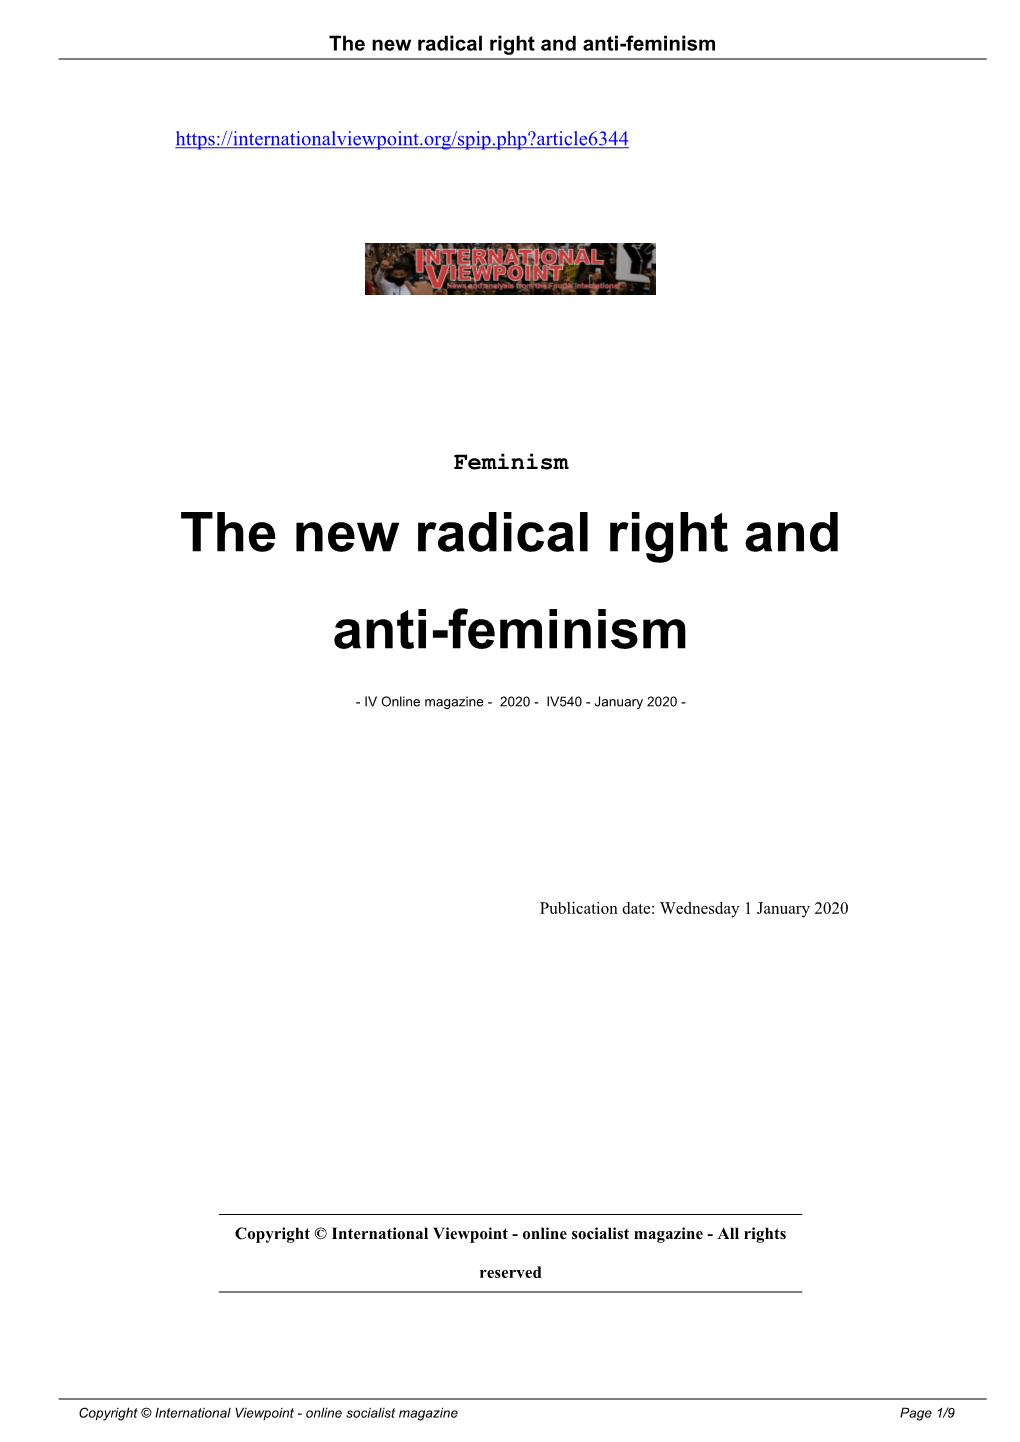 The New Radical Right and Anti-Feminism